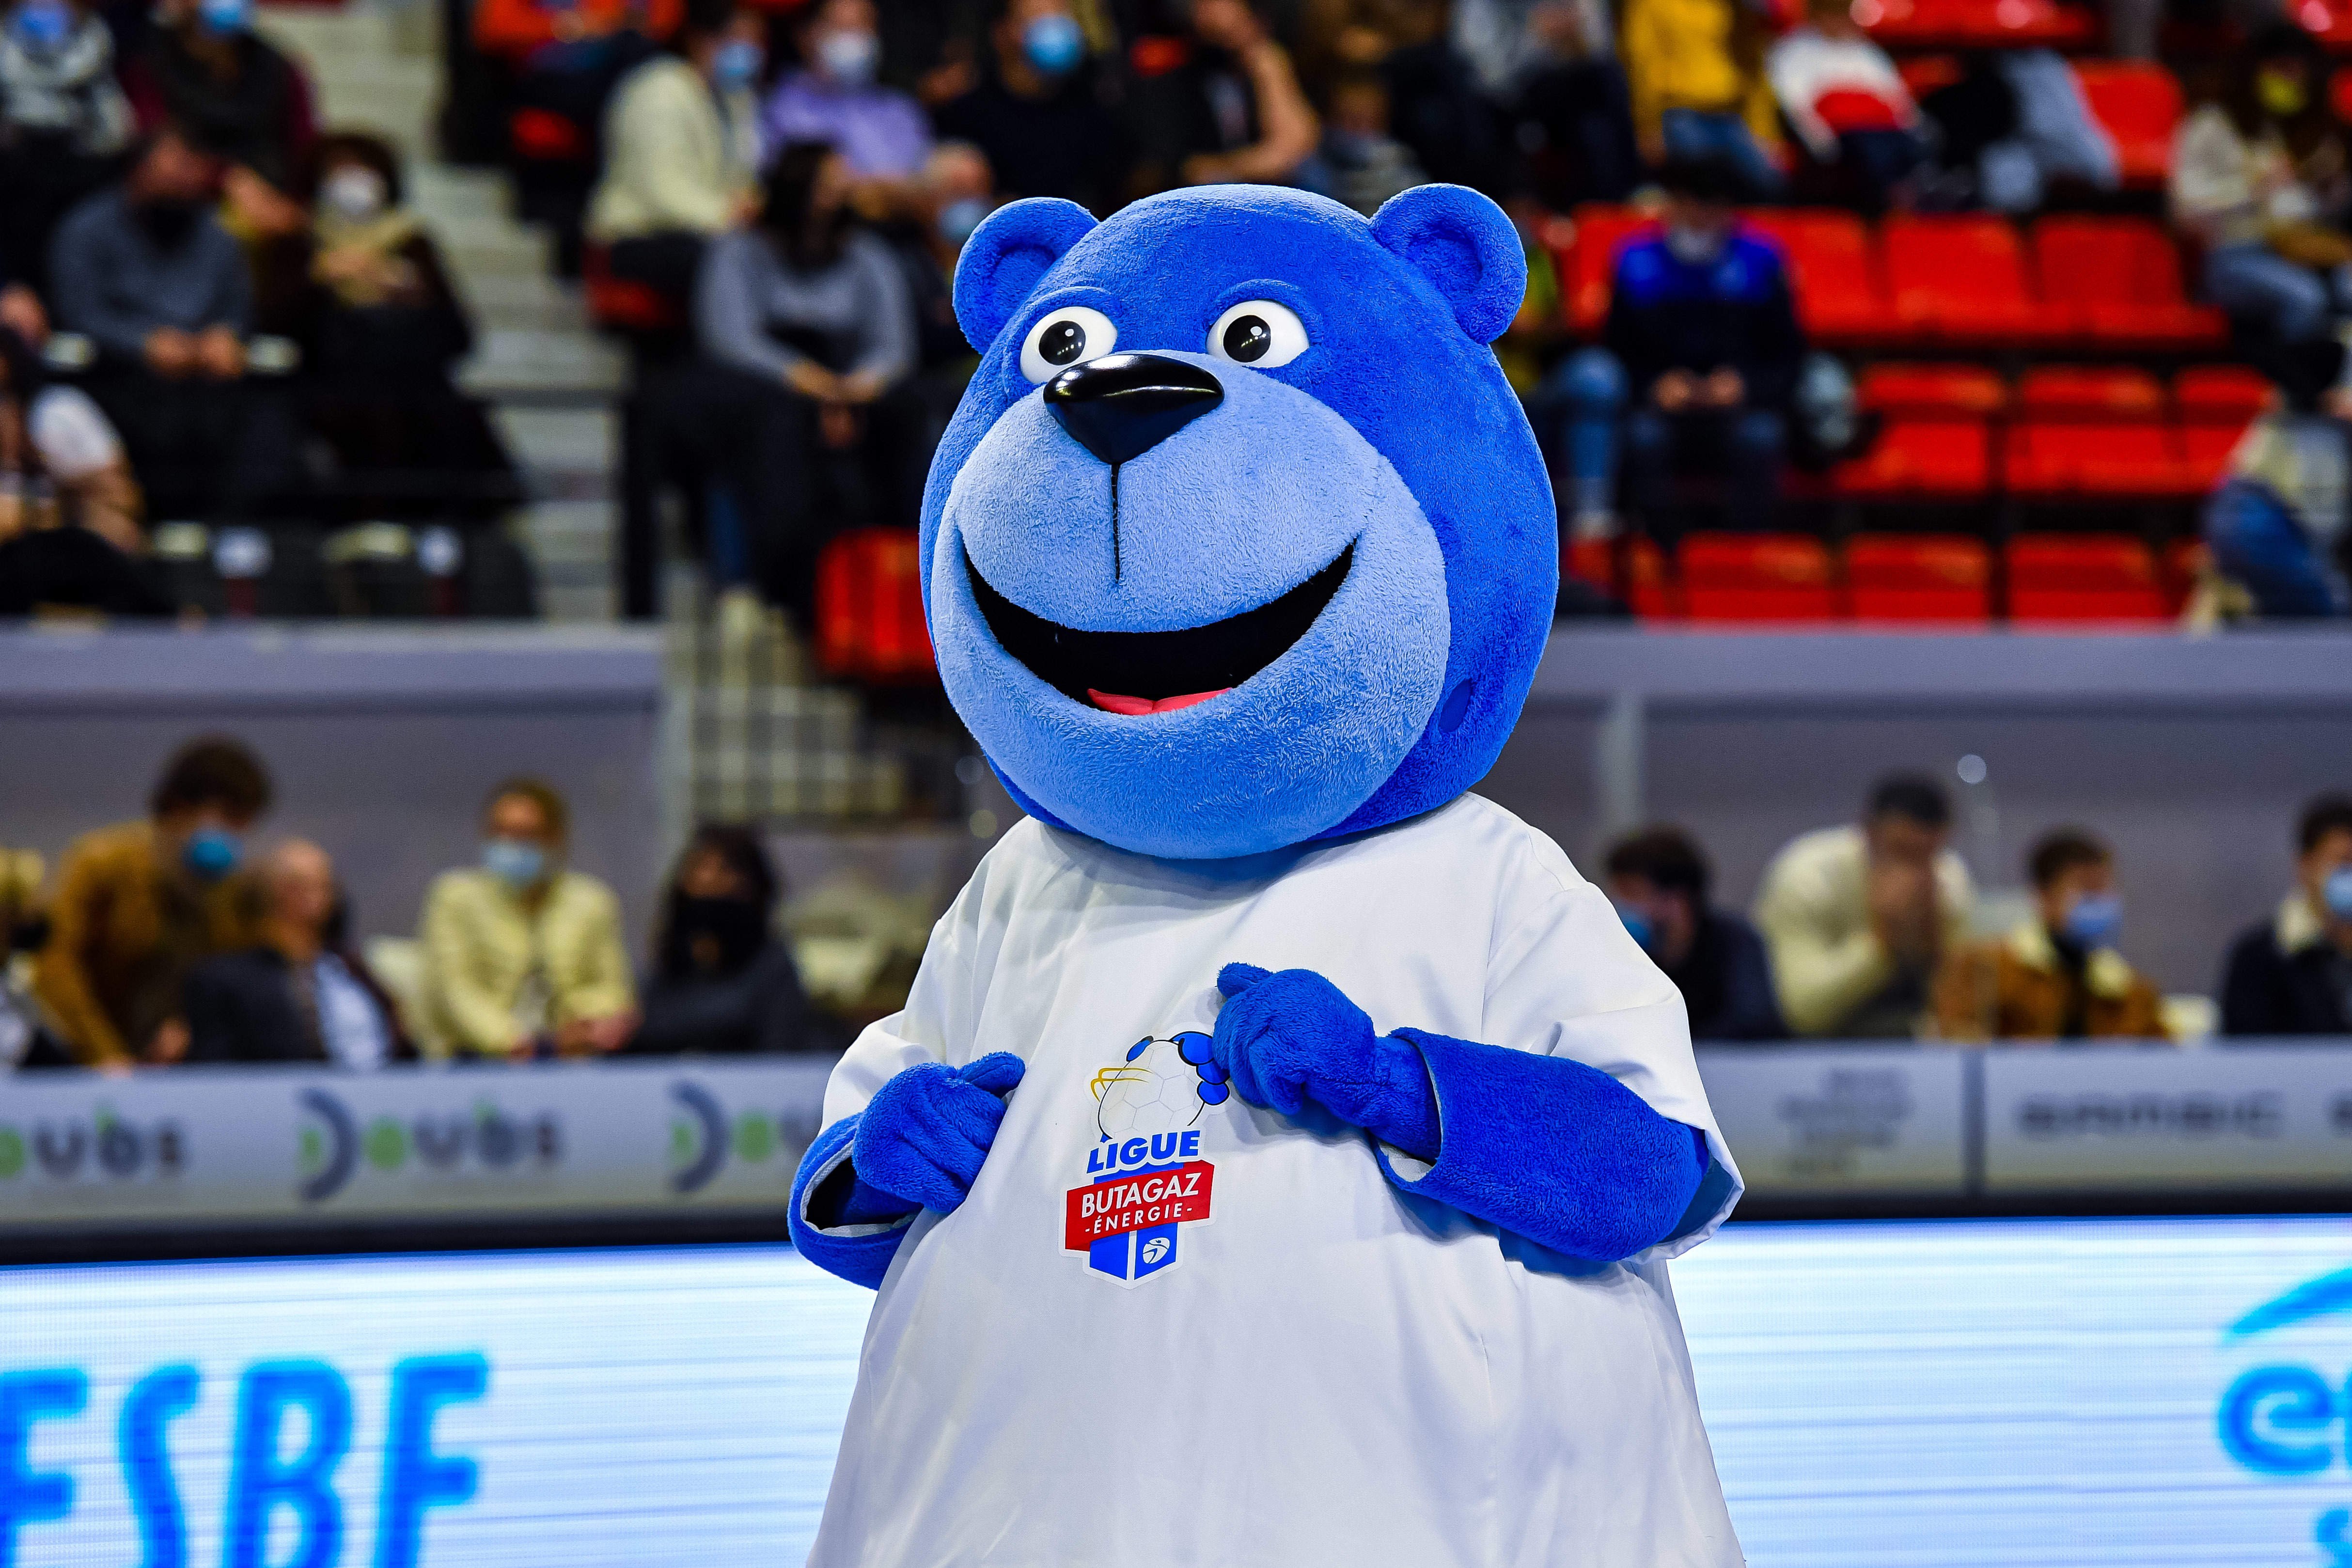 Ligue Butagaz Mascot during the French Ligue Butagaz Energie women’s handball match between Besancon and Metz on February 2, 2022 in Besancon, France. (Photo by Baptiste Fernandez/Icon Sport)